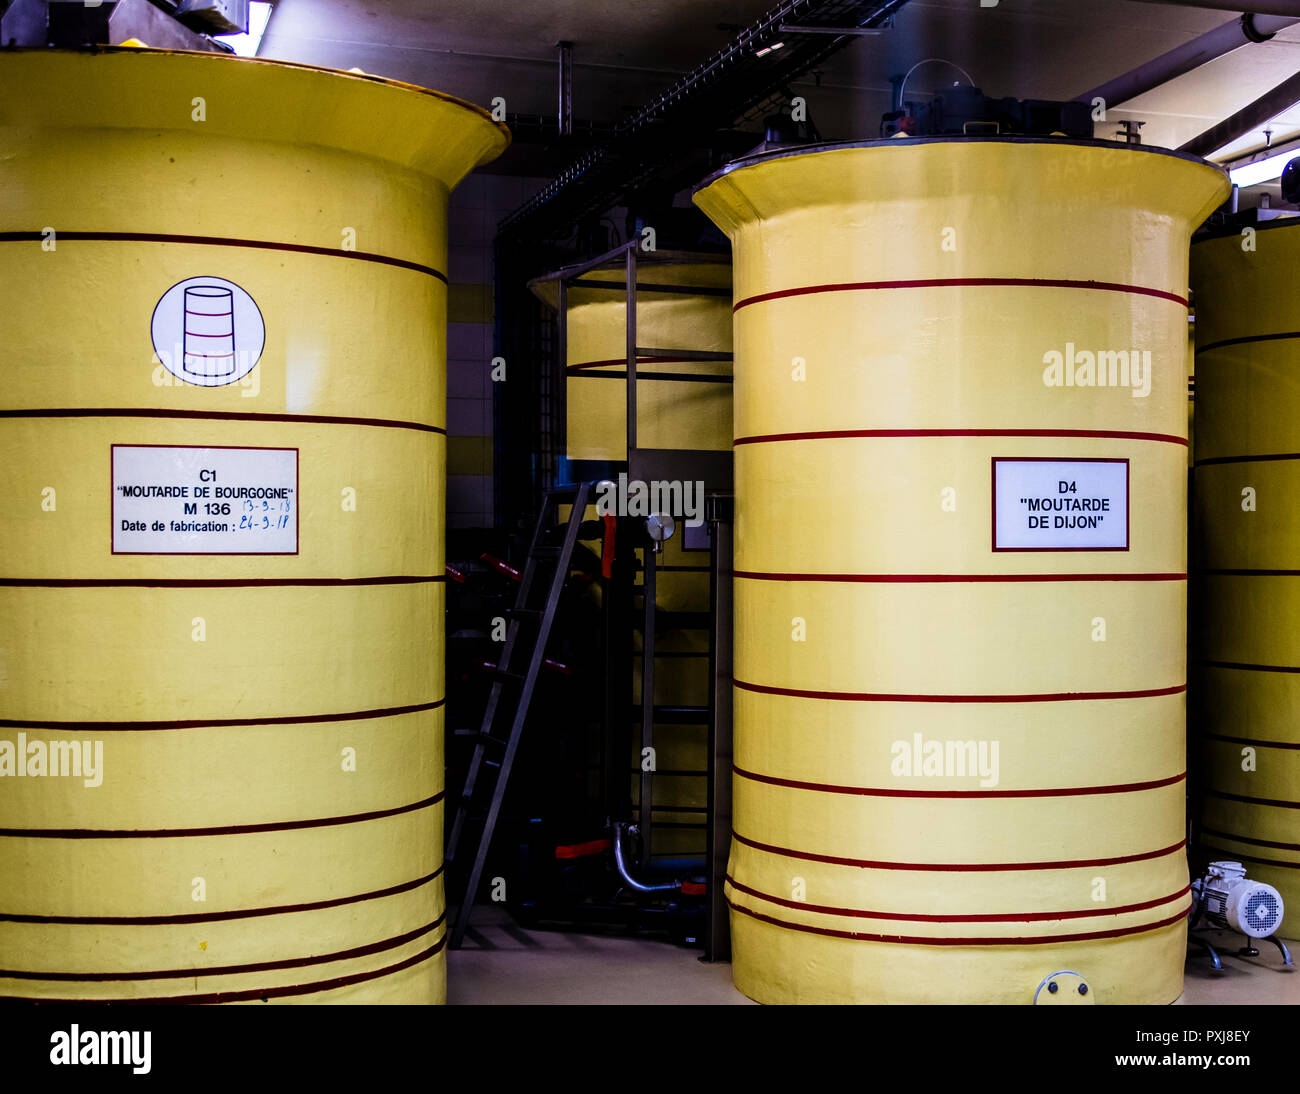 Edmont Fallot mustard fabrication in Beaune, France. The storage containers for Dijon mustard and Burgundy mustard stand side by side. The finished mustard rests here for 24 hours before it is bottled. Stock Photo